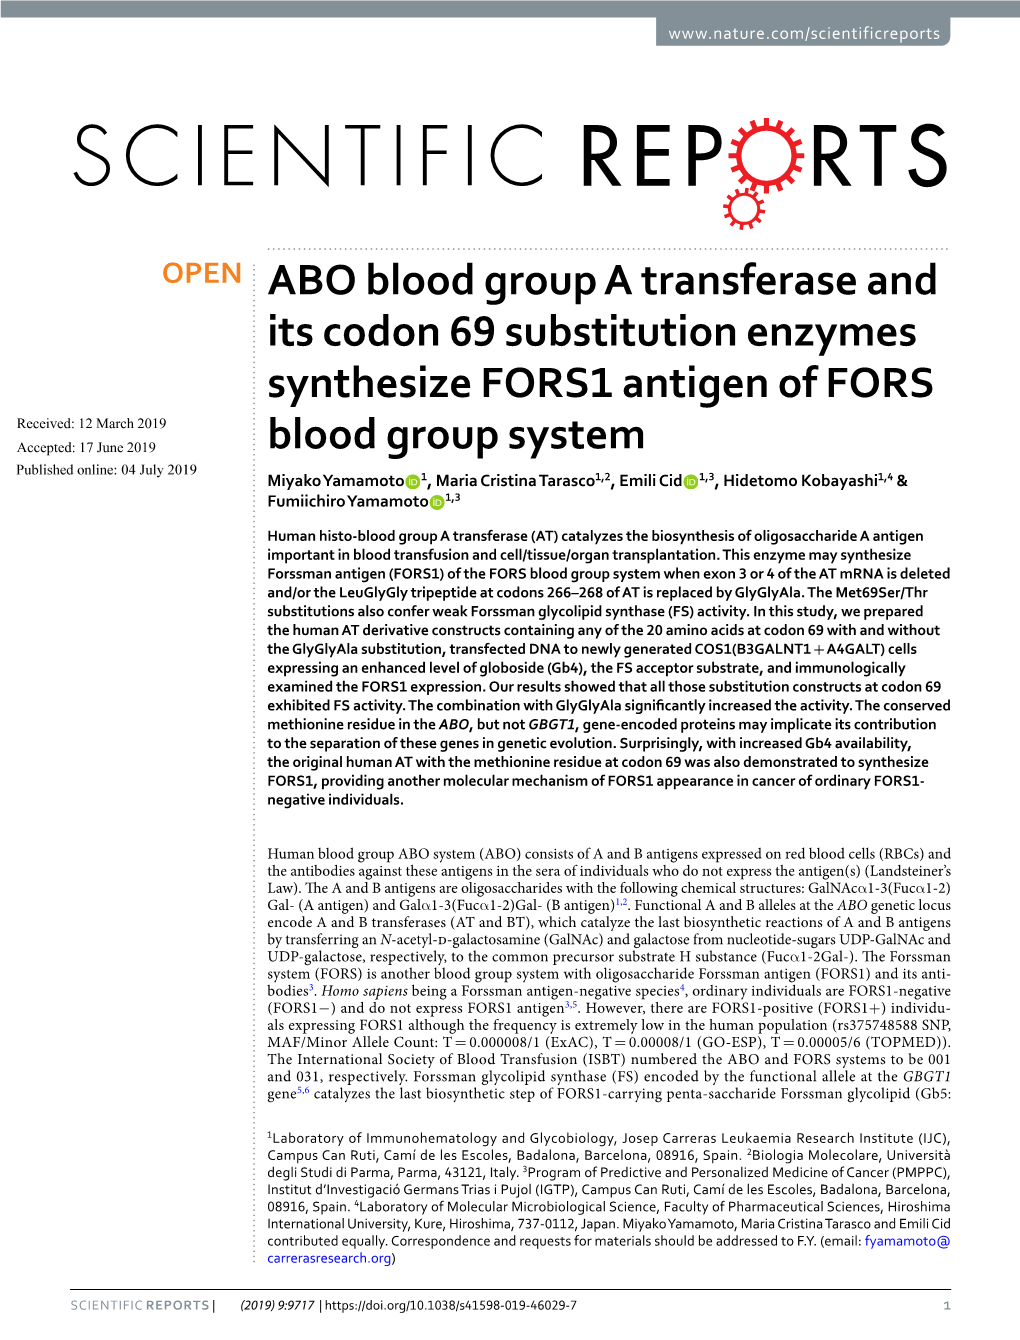 ABO Blood Group a Transferase and Its Codon 69 Substitution